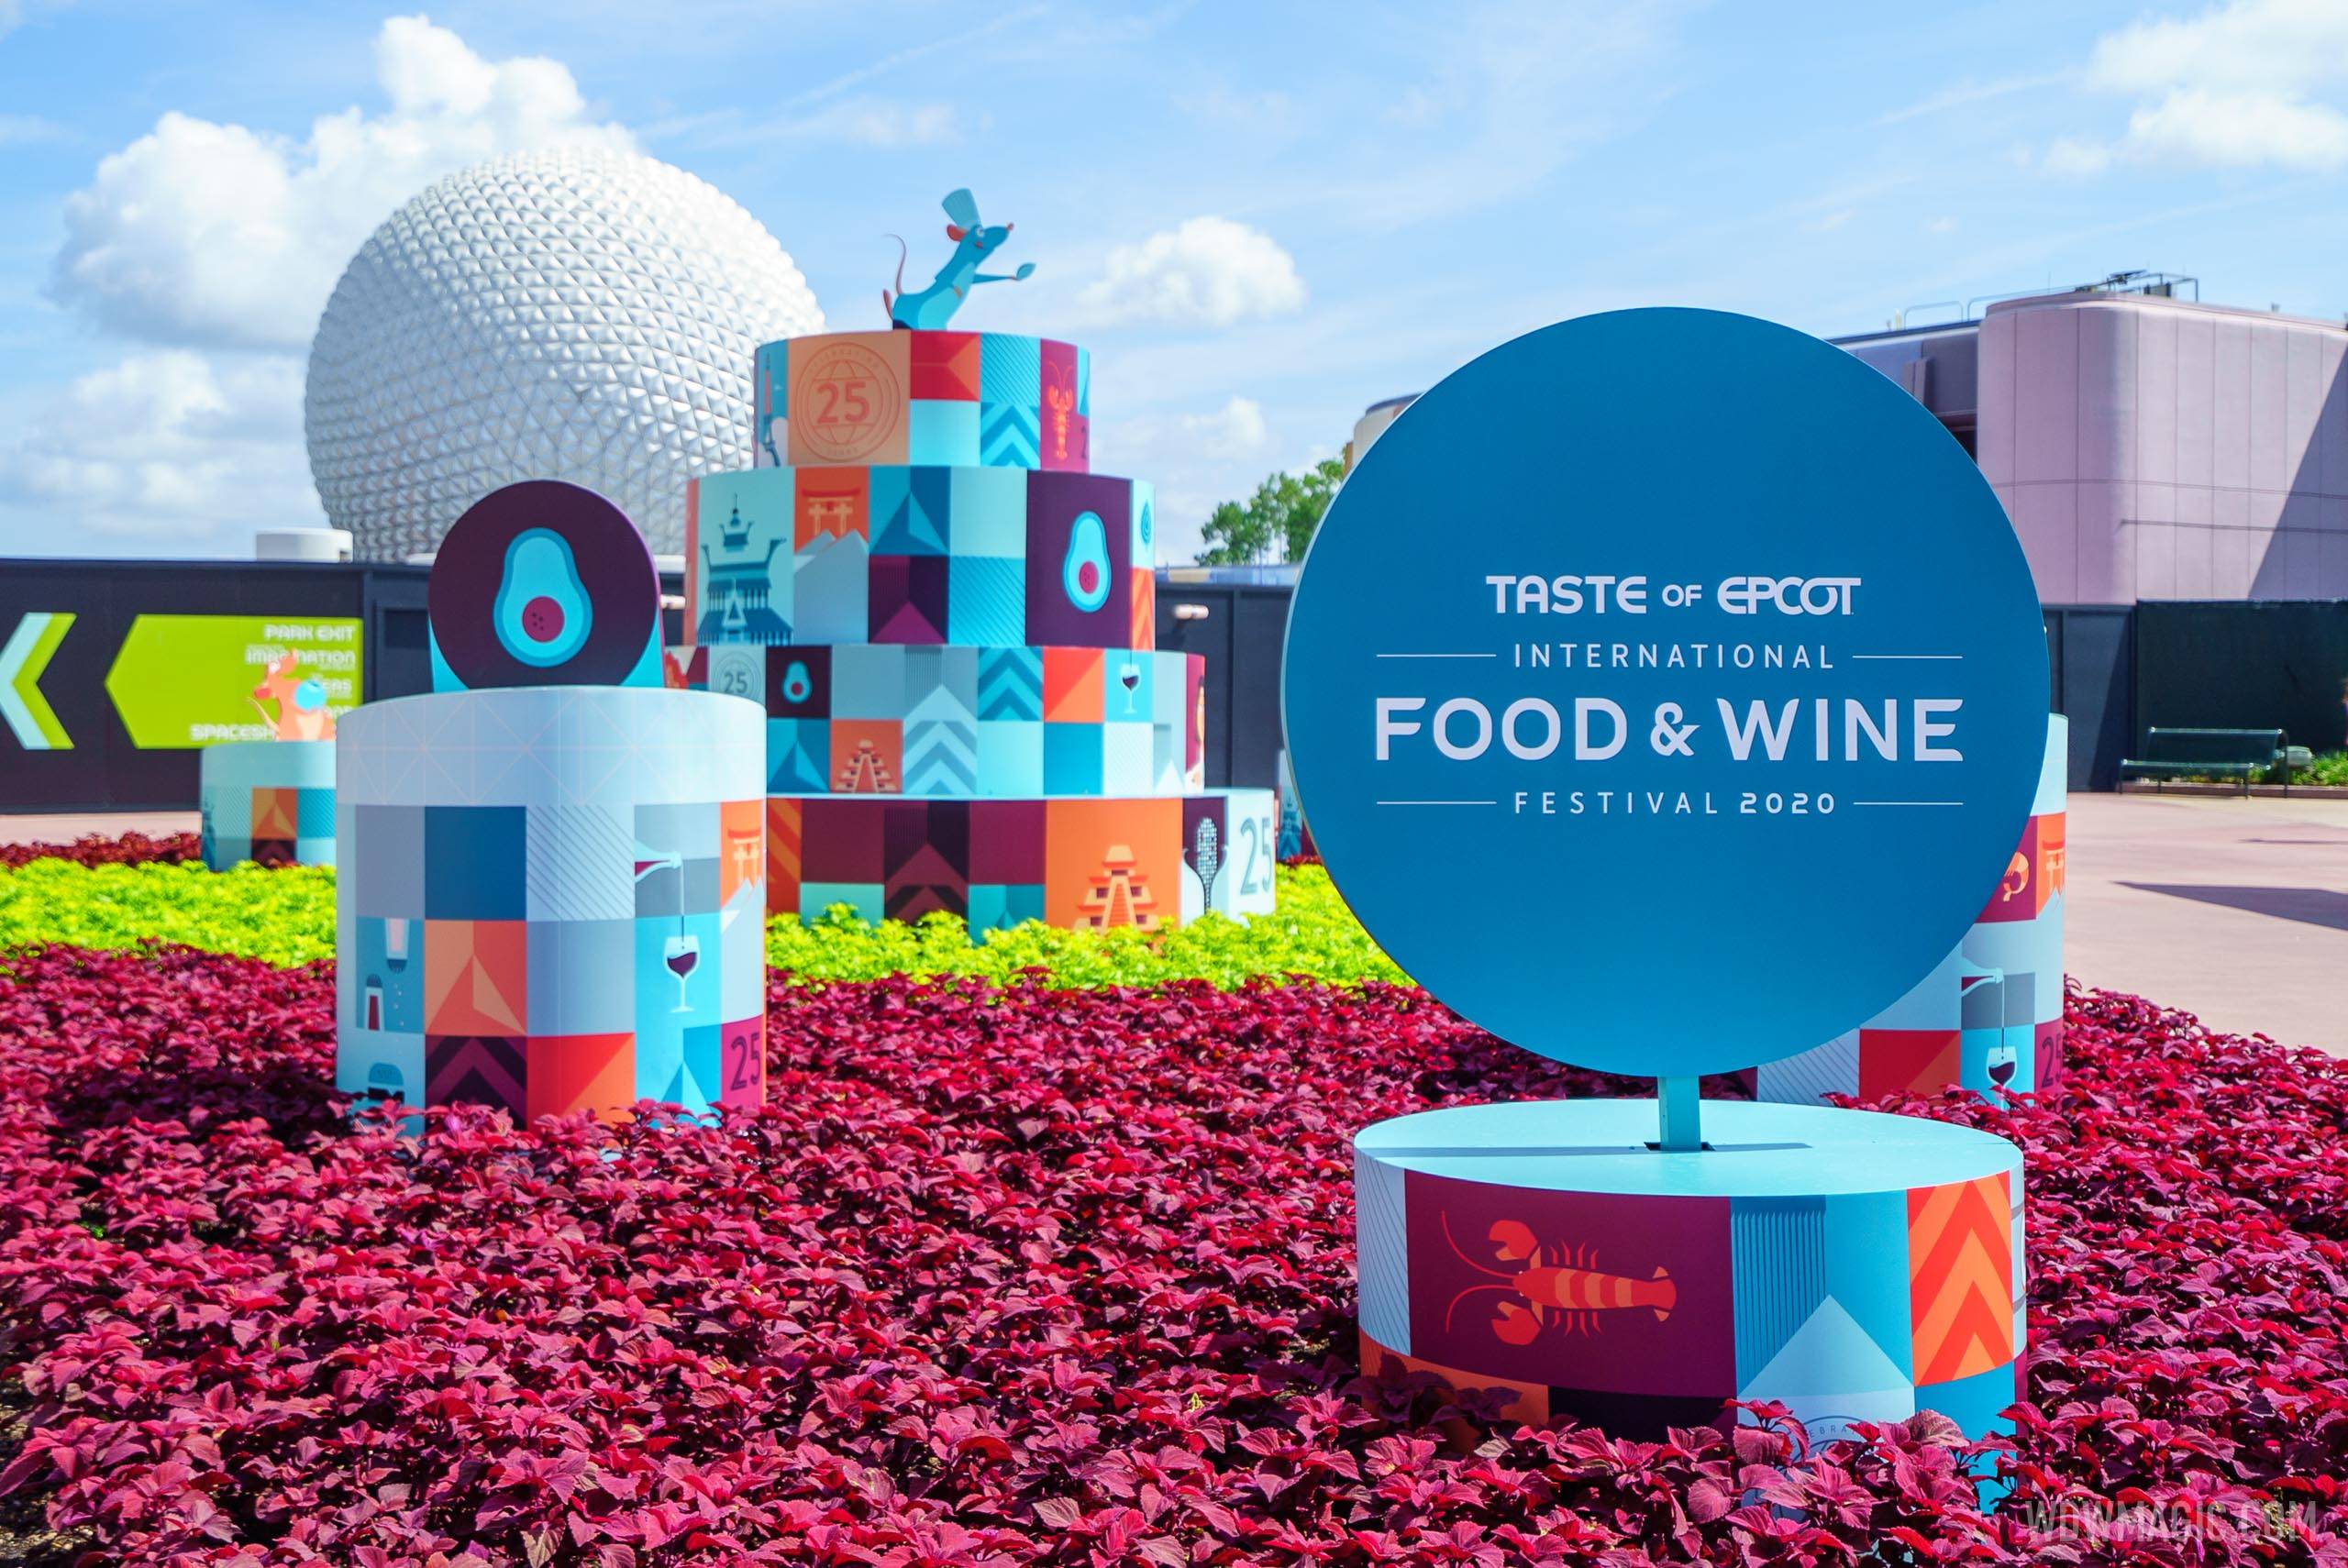 PHOTOS - A look around the 2020 Taste of EPCOT International Food and Wine Festival